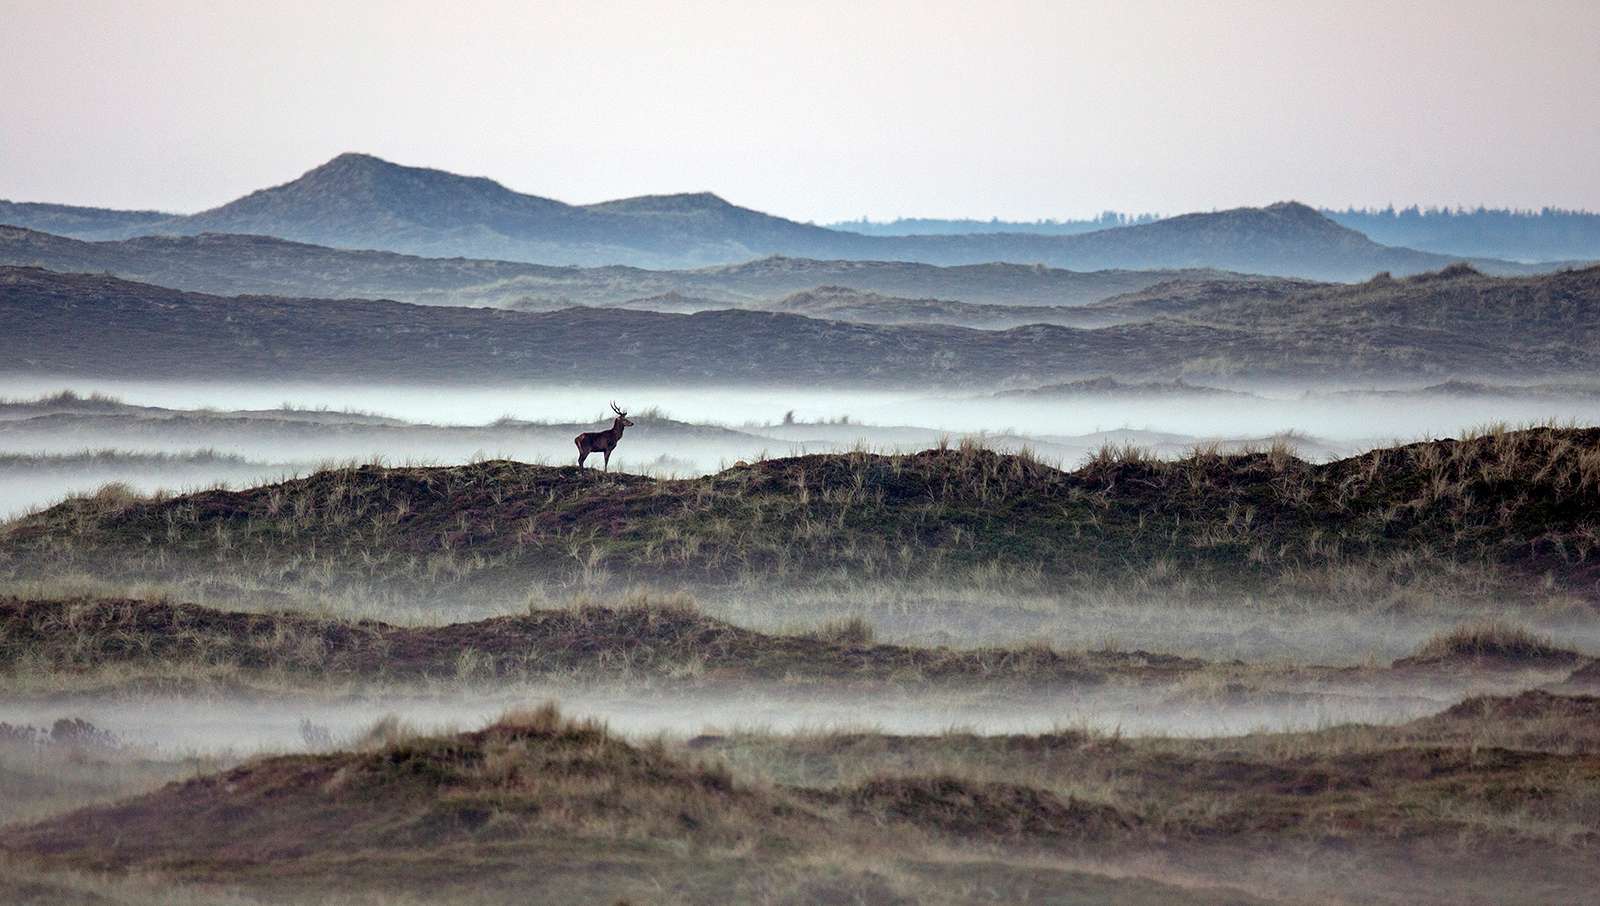 Red deer in the distance in the middle of a misty and hilly view